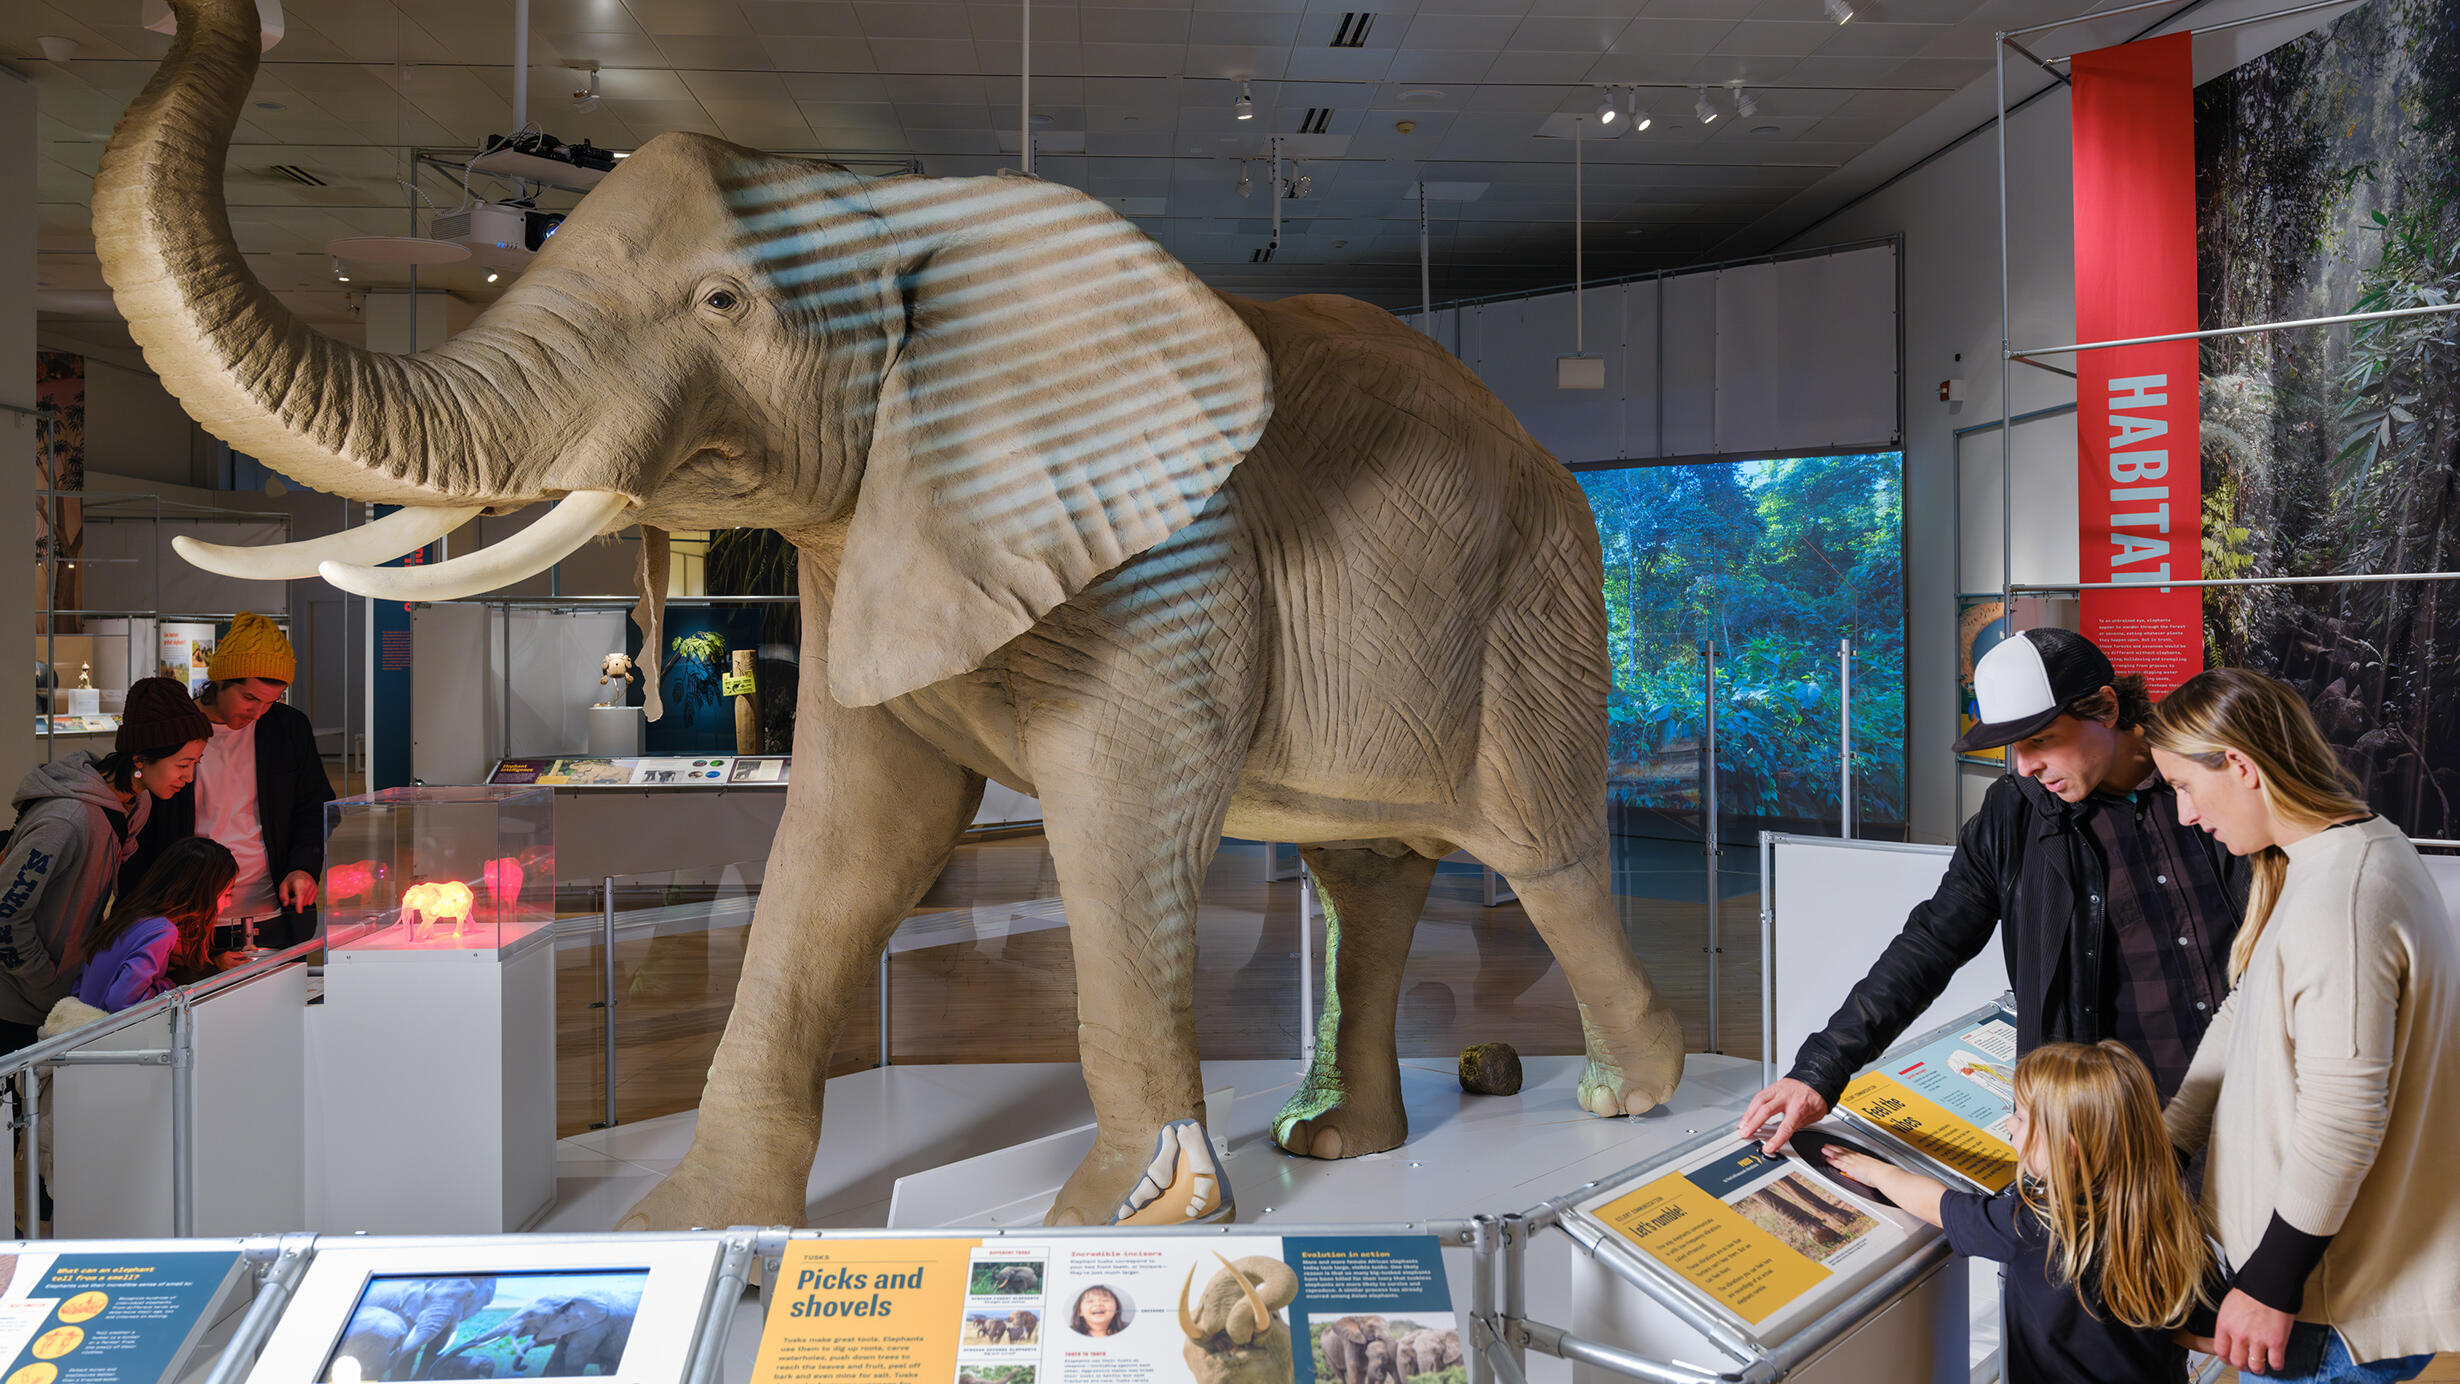 A family with a young child explore an interactive panel at a museum exhibition. A large model of an elephant is illuminated before them.